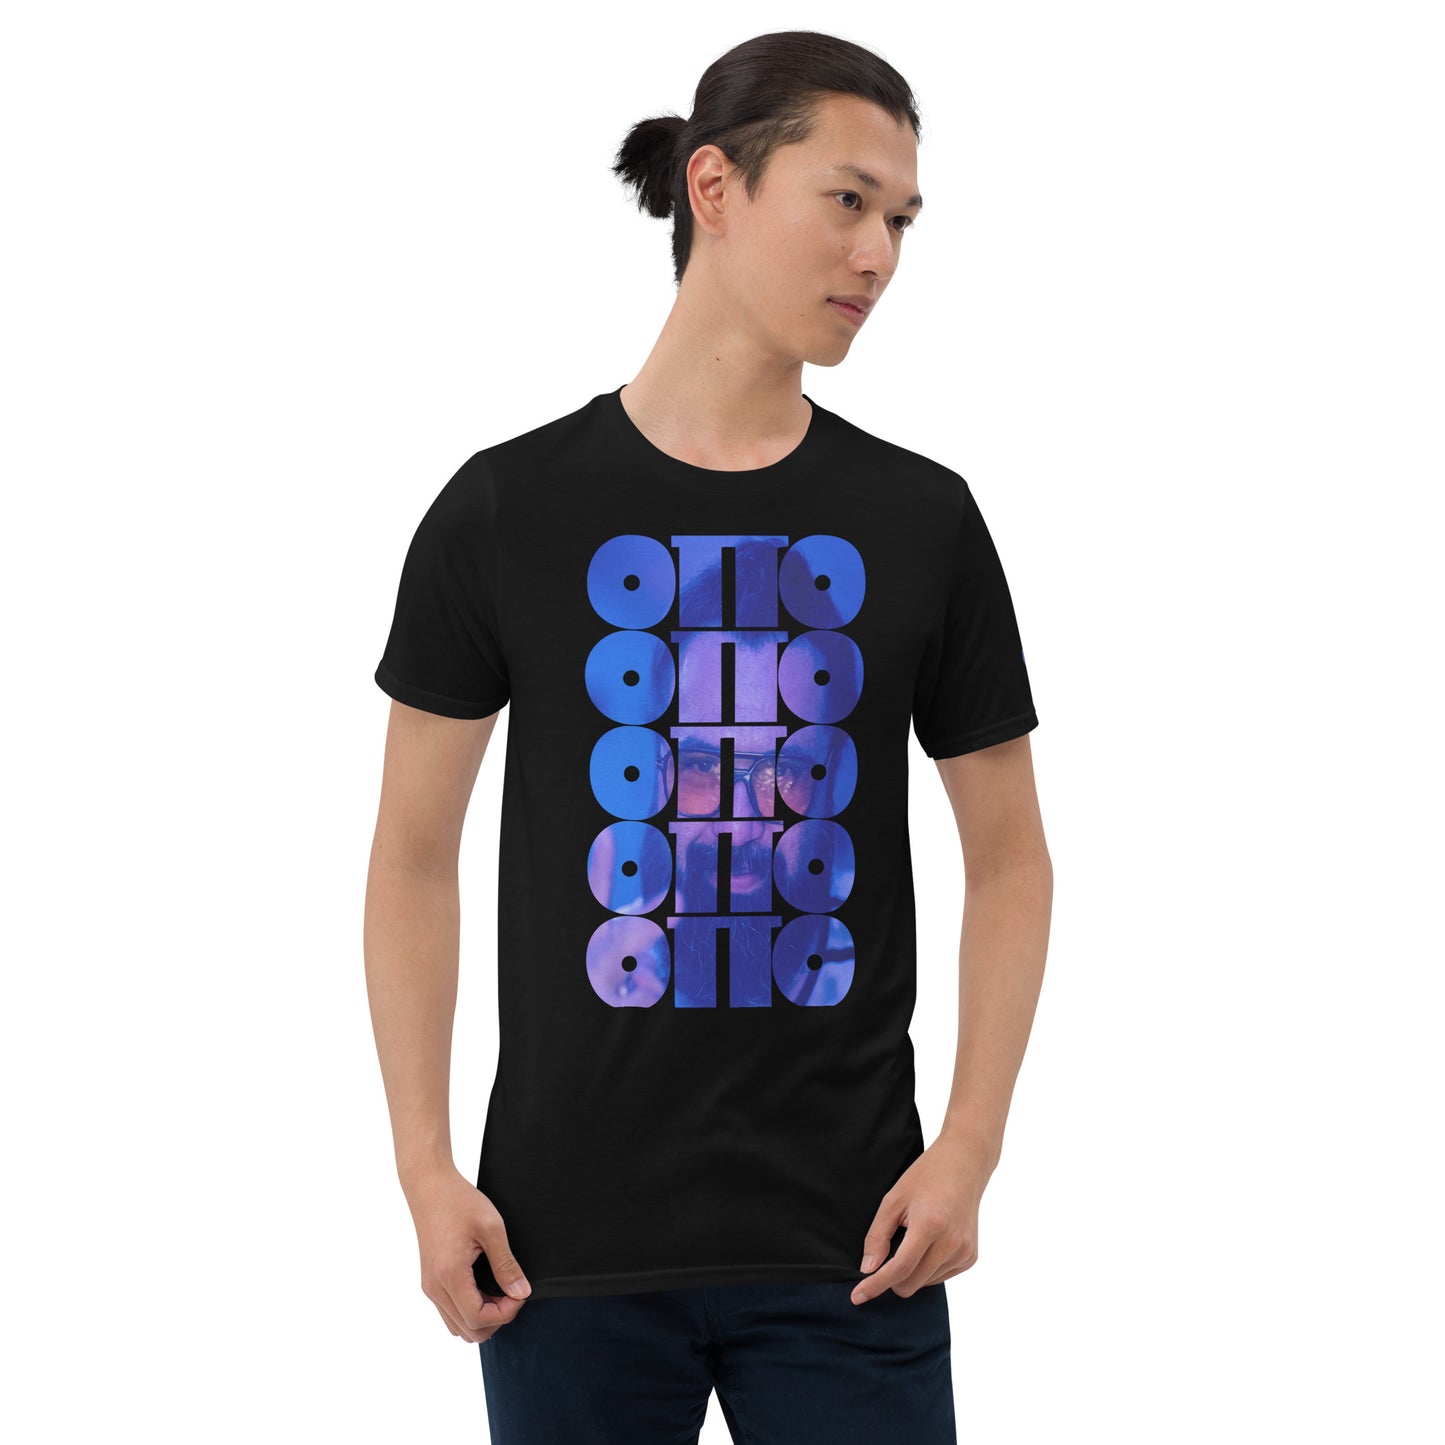 Otto-Matic Lover Shirt